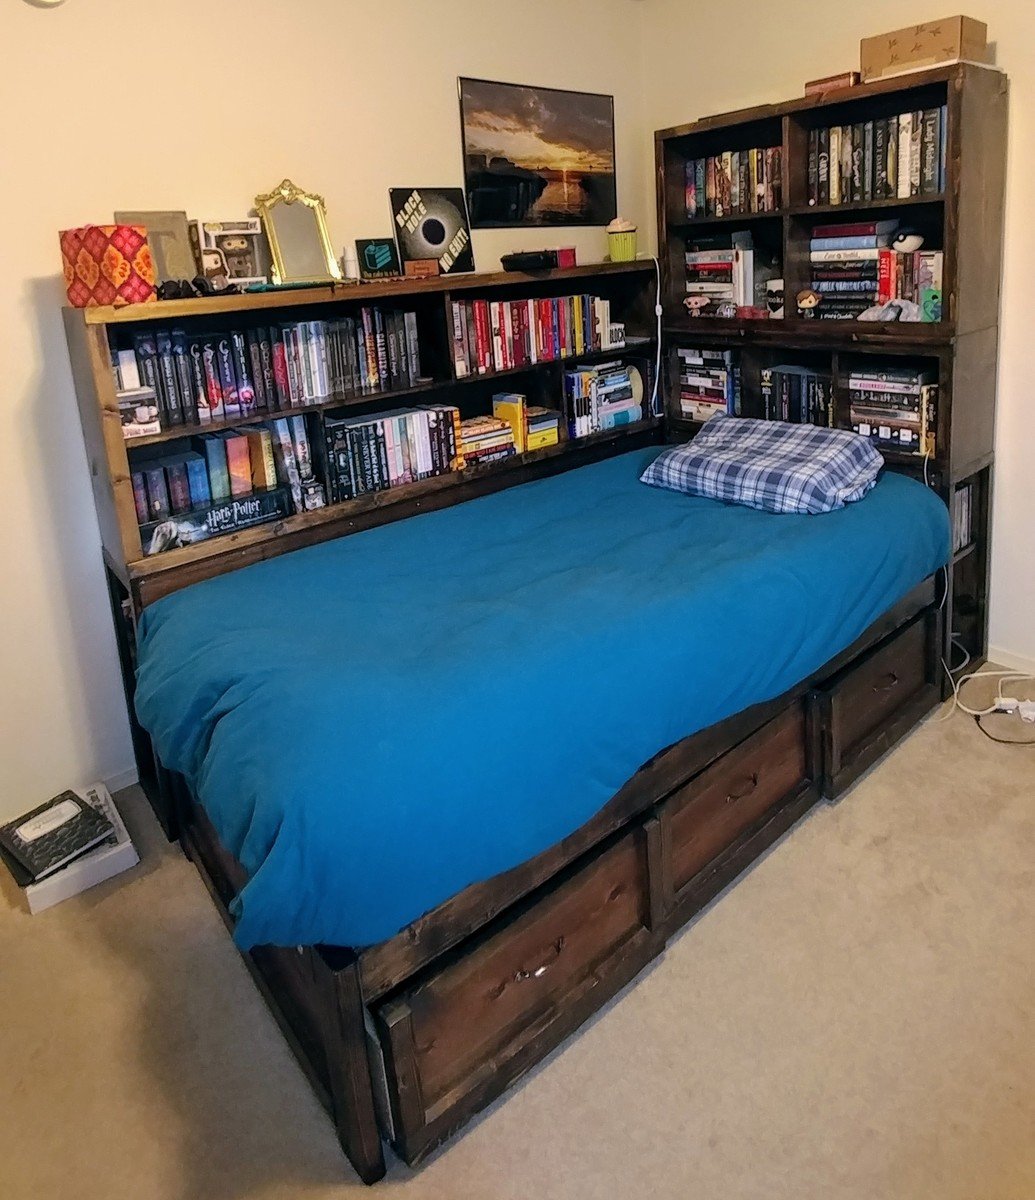 Storage Daybed With Bookshelf Surround, Daybed With Shelves And Storage